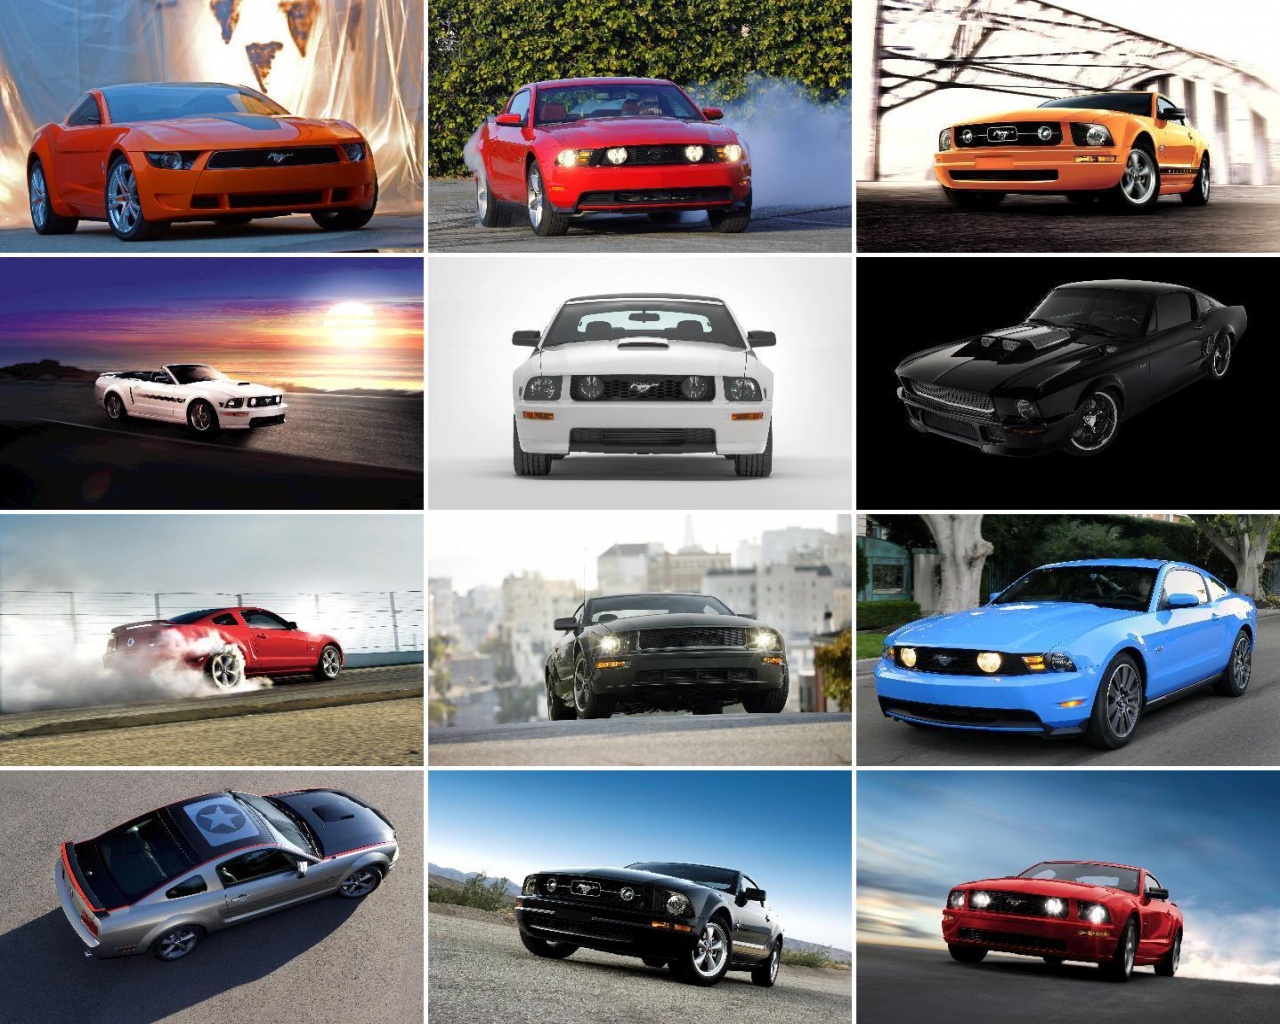 Check Out These Mustang Gt Wallpaper At 1080pHDwallpaper